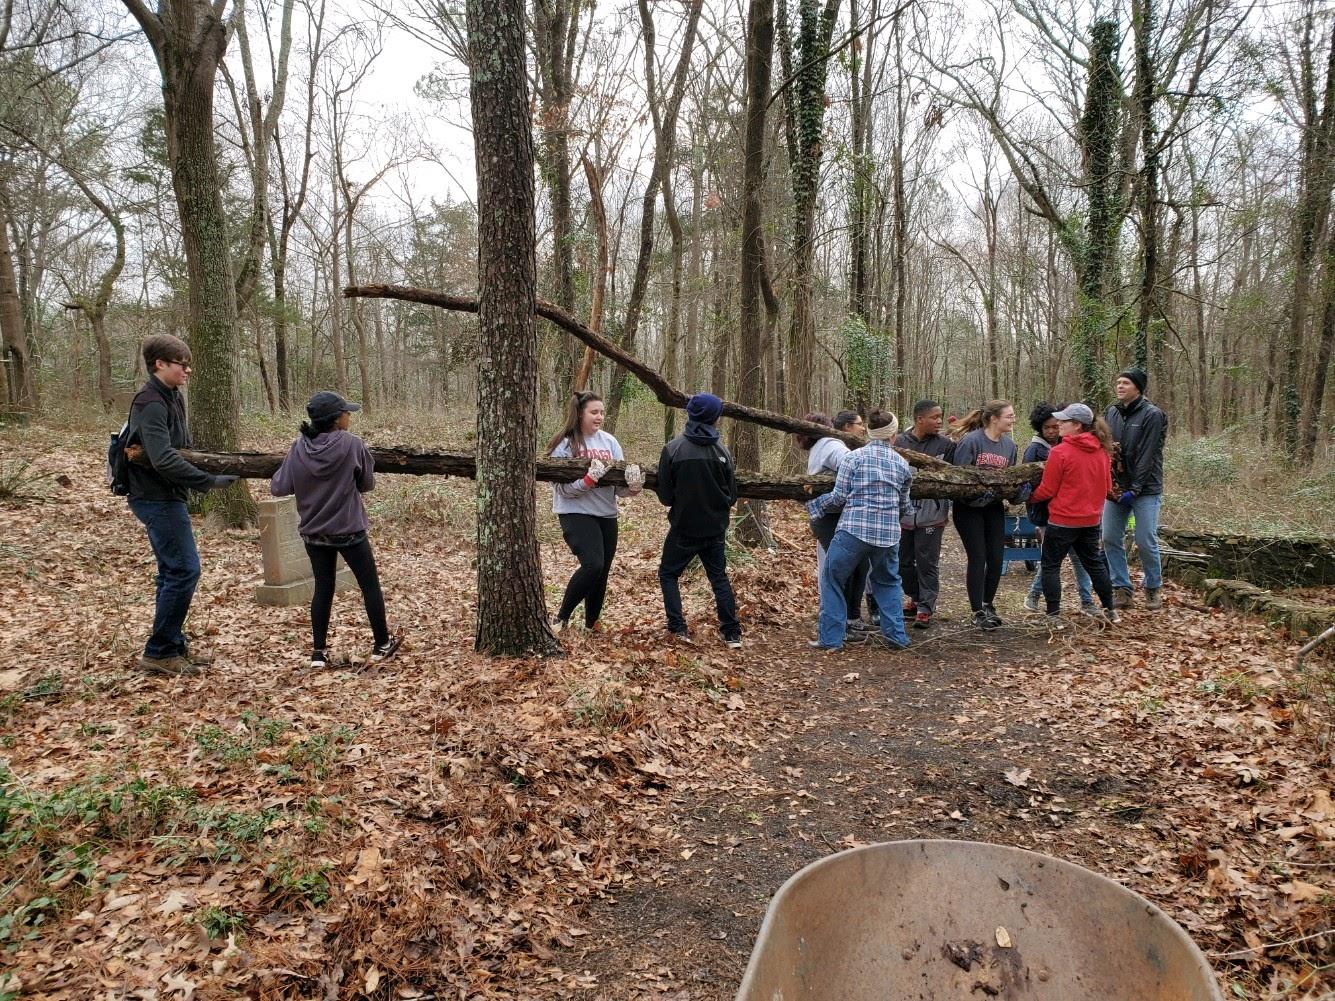 FRC members work together to move a tree at Gospel Pilgrim